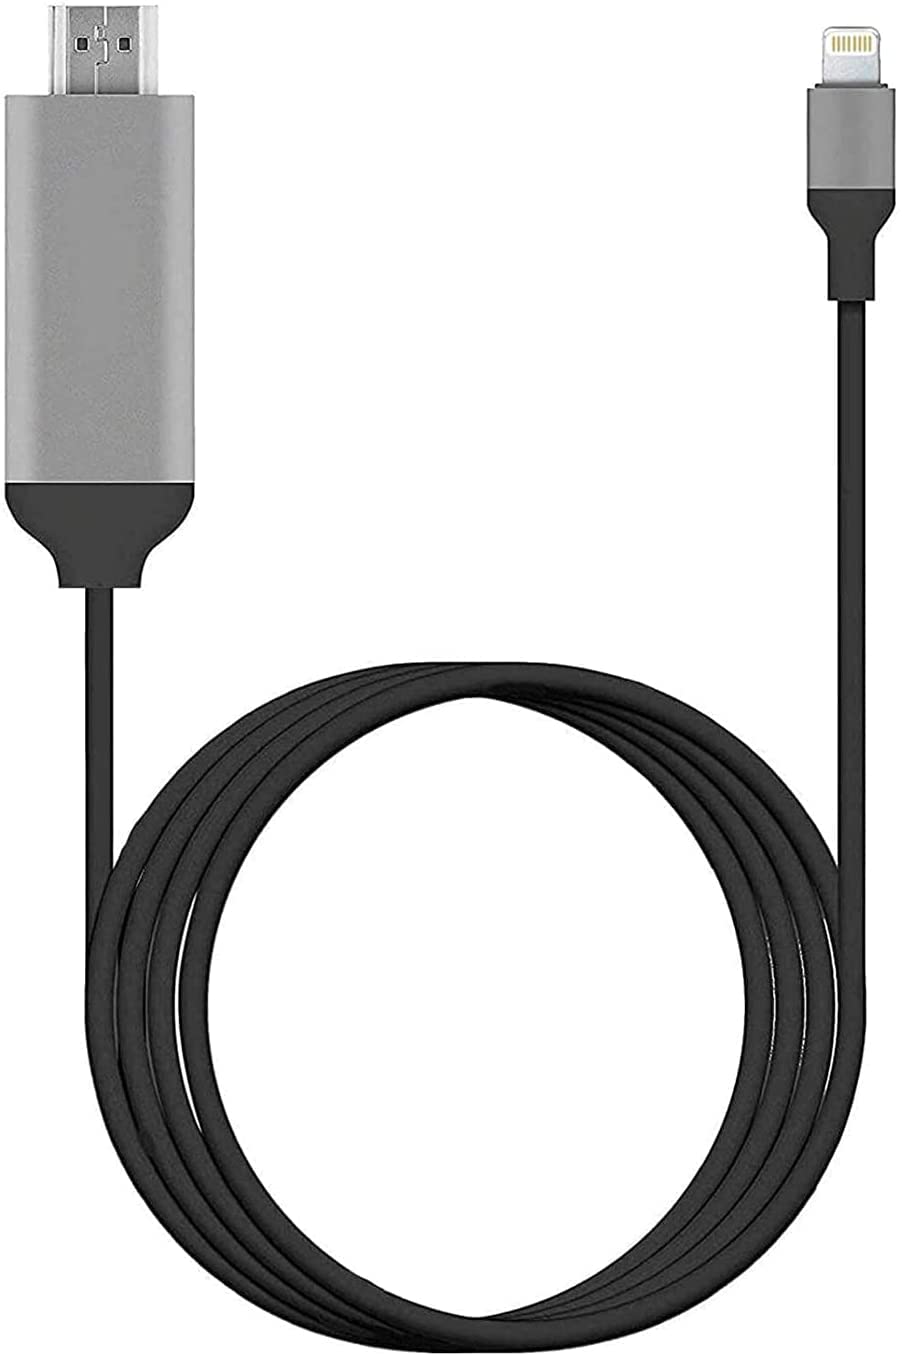  [AUSTRALIA] - Lightning to HDMI Adapter, [Apple MFi Certified] 1080P HDTV Cable Adapter, Digital AV Sync Screen Connector on TV/Monitor/Projector Compatible for iPhone, iPad -NO Need Power Supply (Black, 6.6FT)